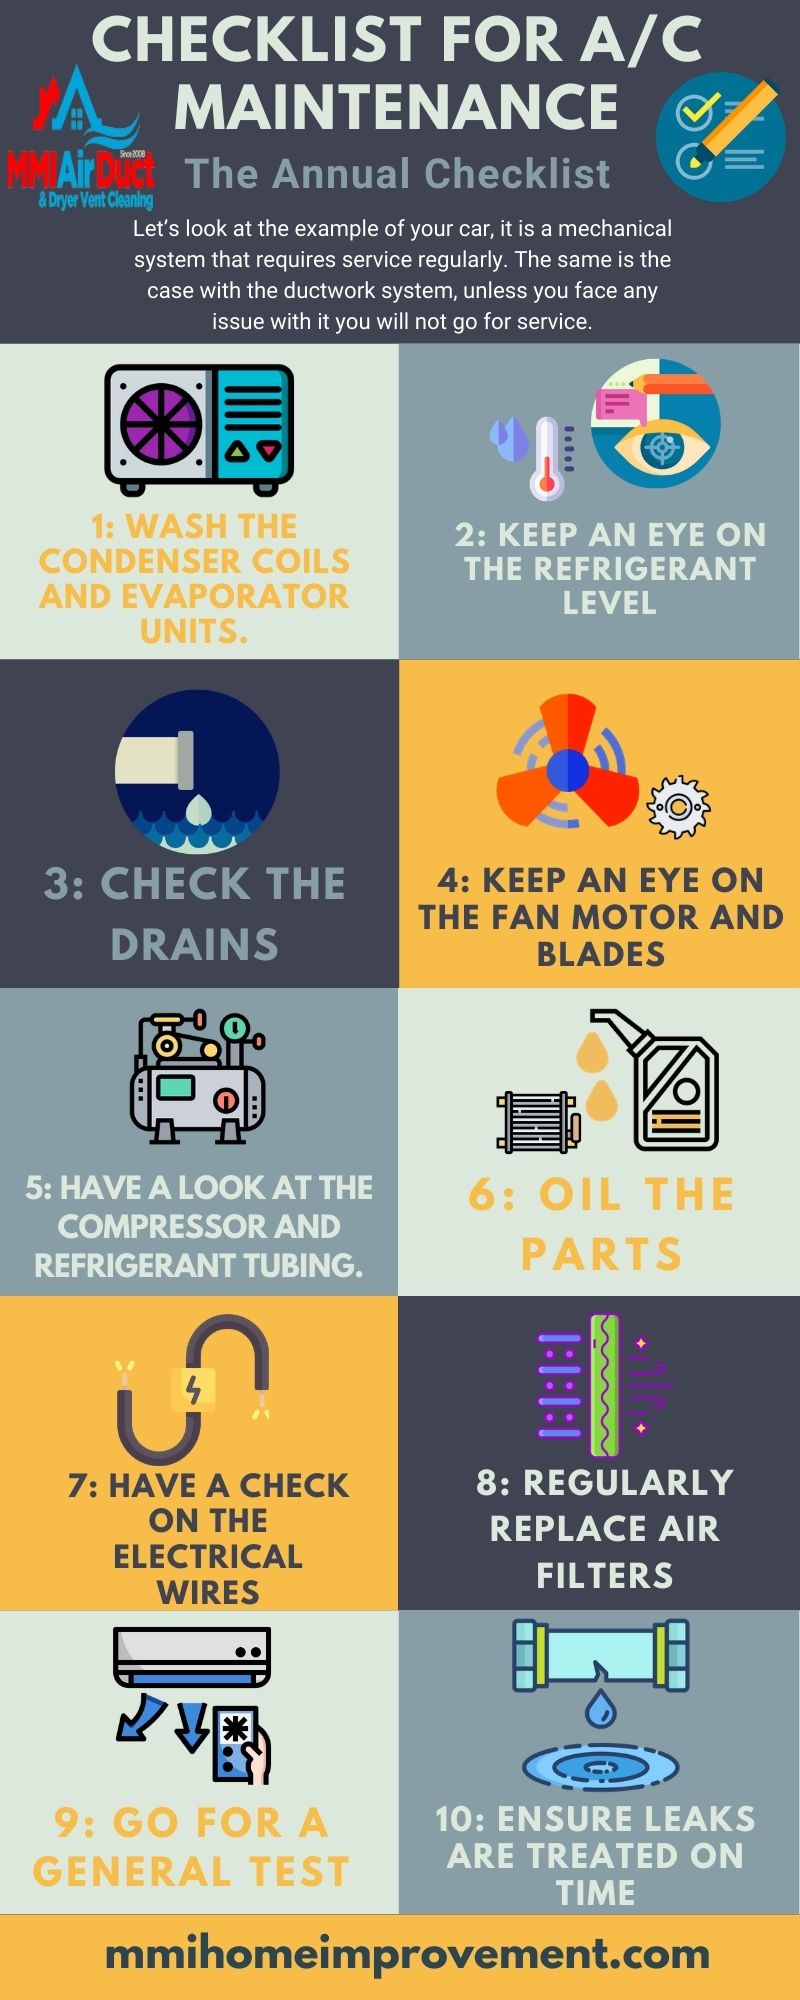 Checklist for AC Maintenance - Infographic